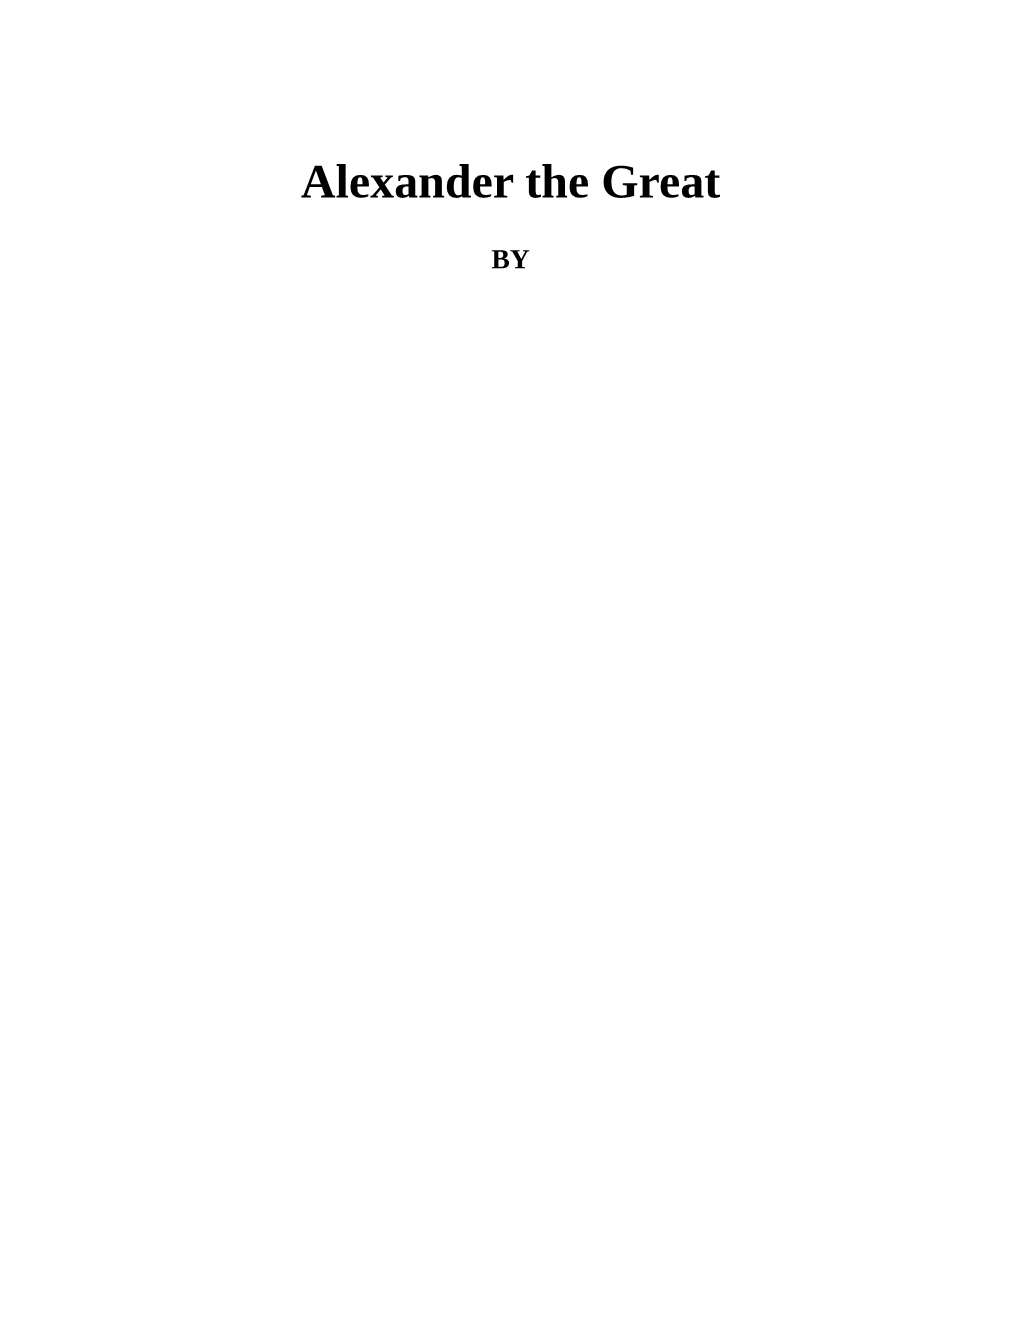 Alexander the Great / Makers of History